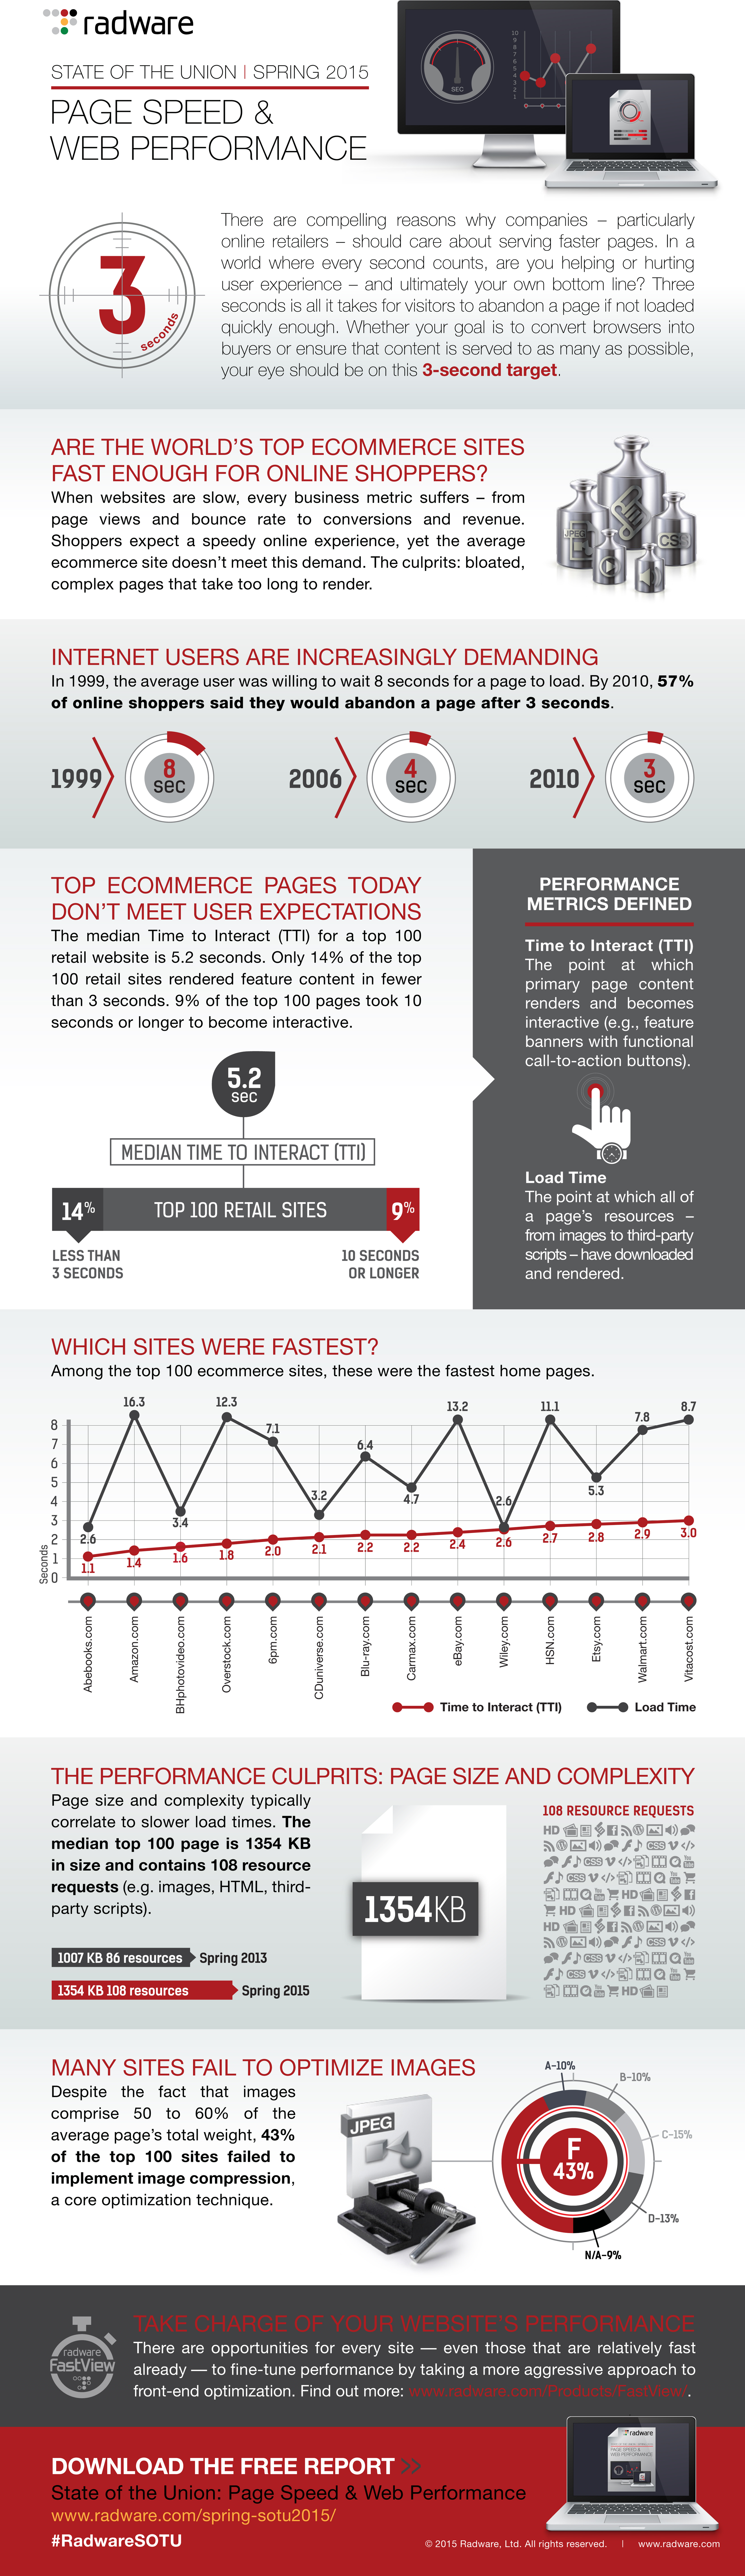 2015 Spring State of the Union: Ecommerce Page Speed & Web Performance Infographic